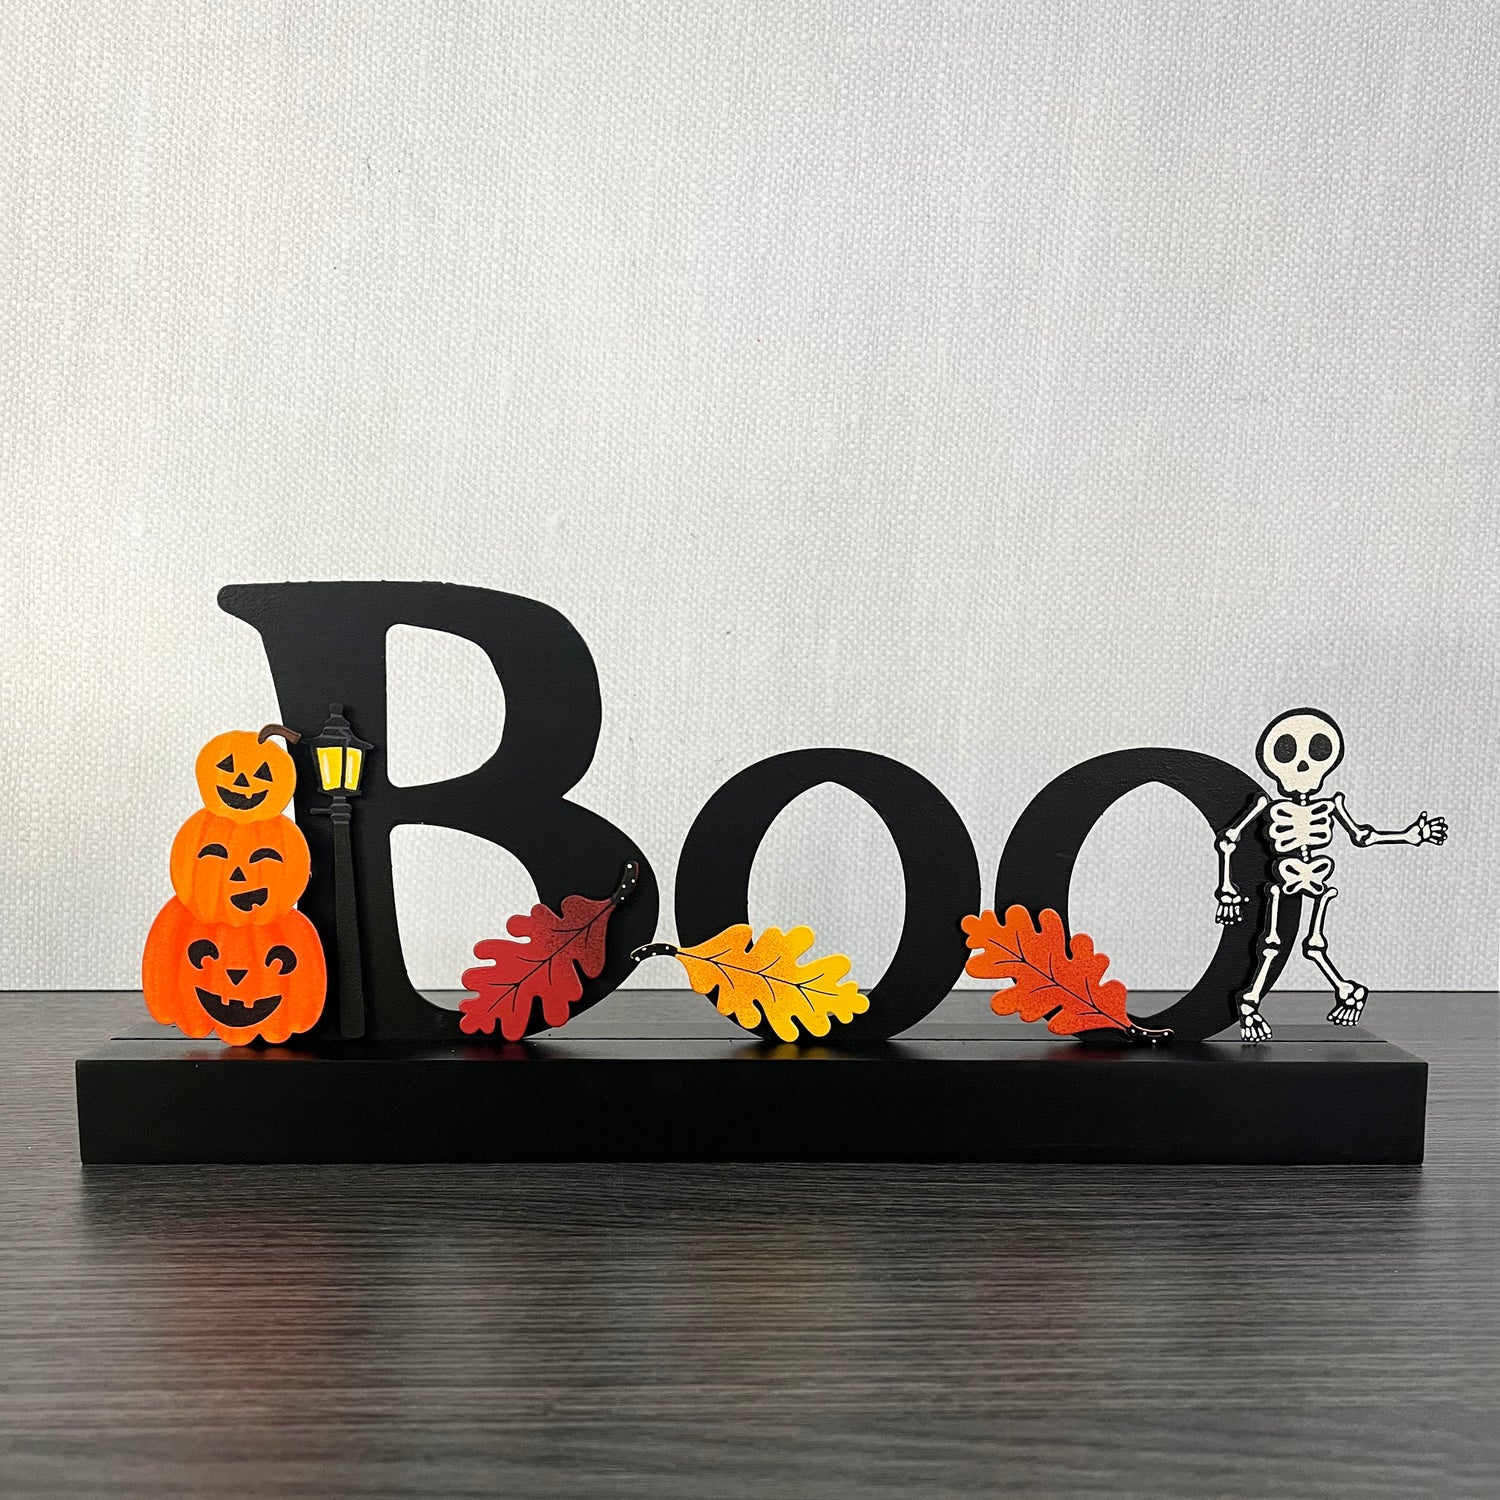 &quot;Boo&quot; Magnetic Word w/ Wood Base